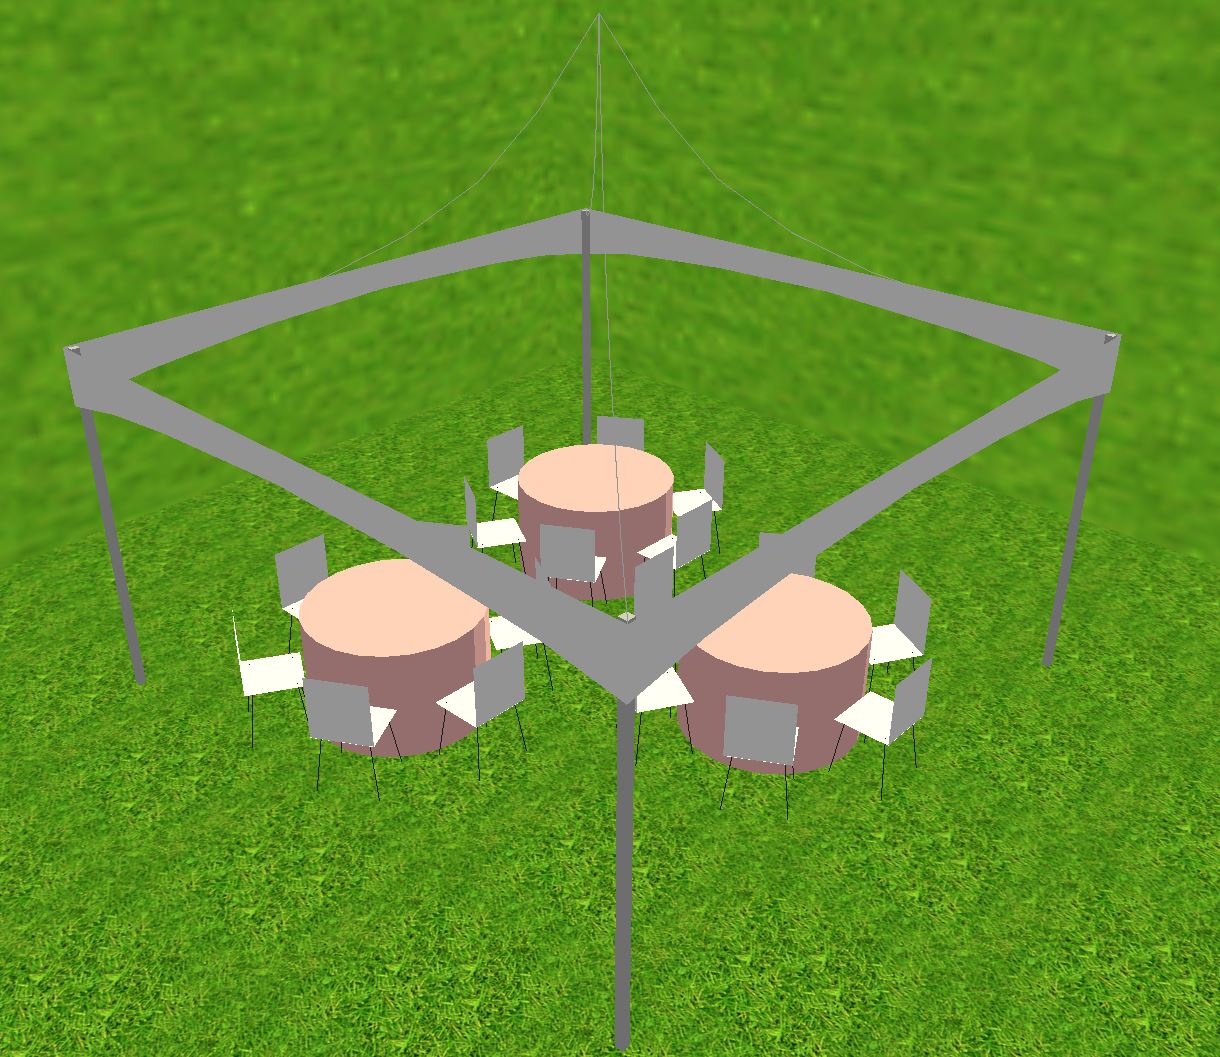 15x15 tent - Small Tent Layout